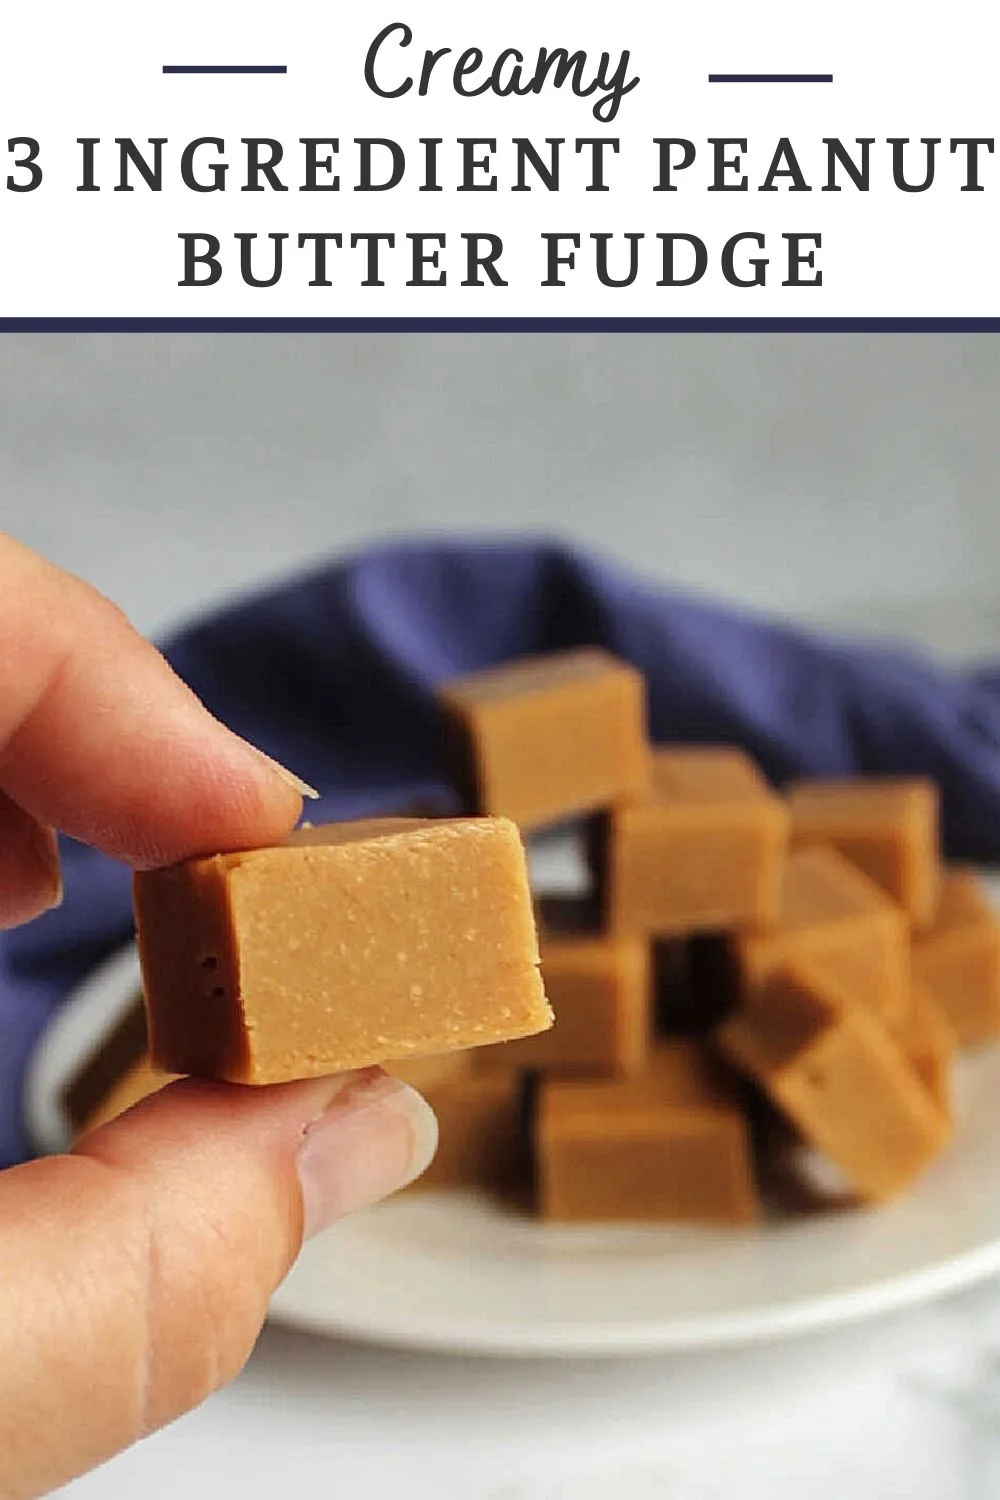 Smooth creamy 3 ingredient peanut butter fudge is so easy to make and super delicious. It is a perfect treat for almost any occasion.